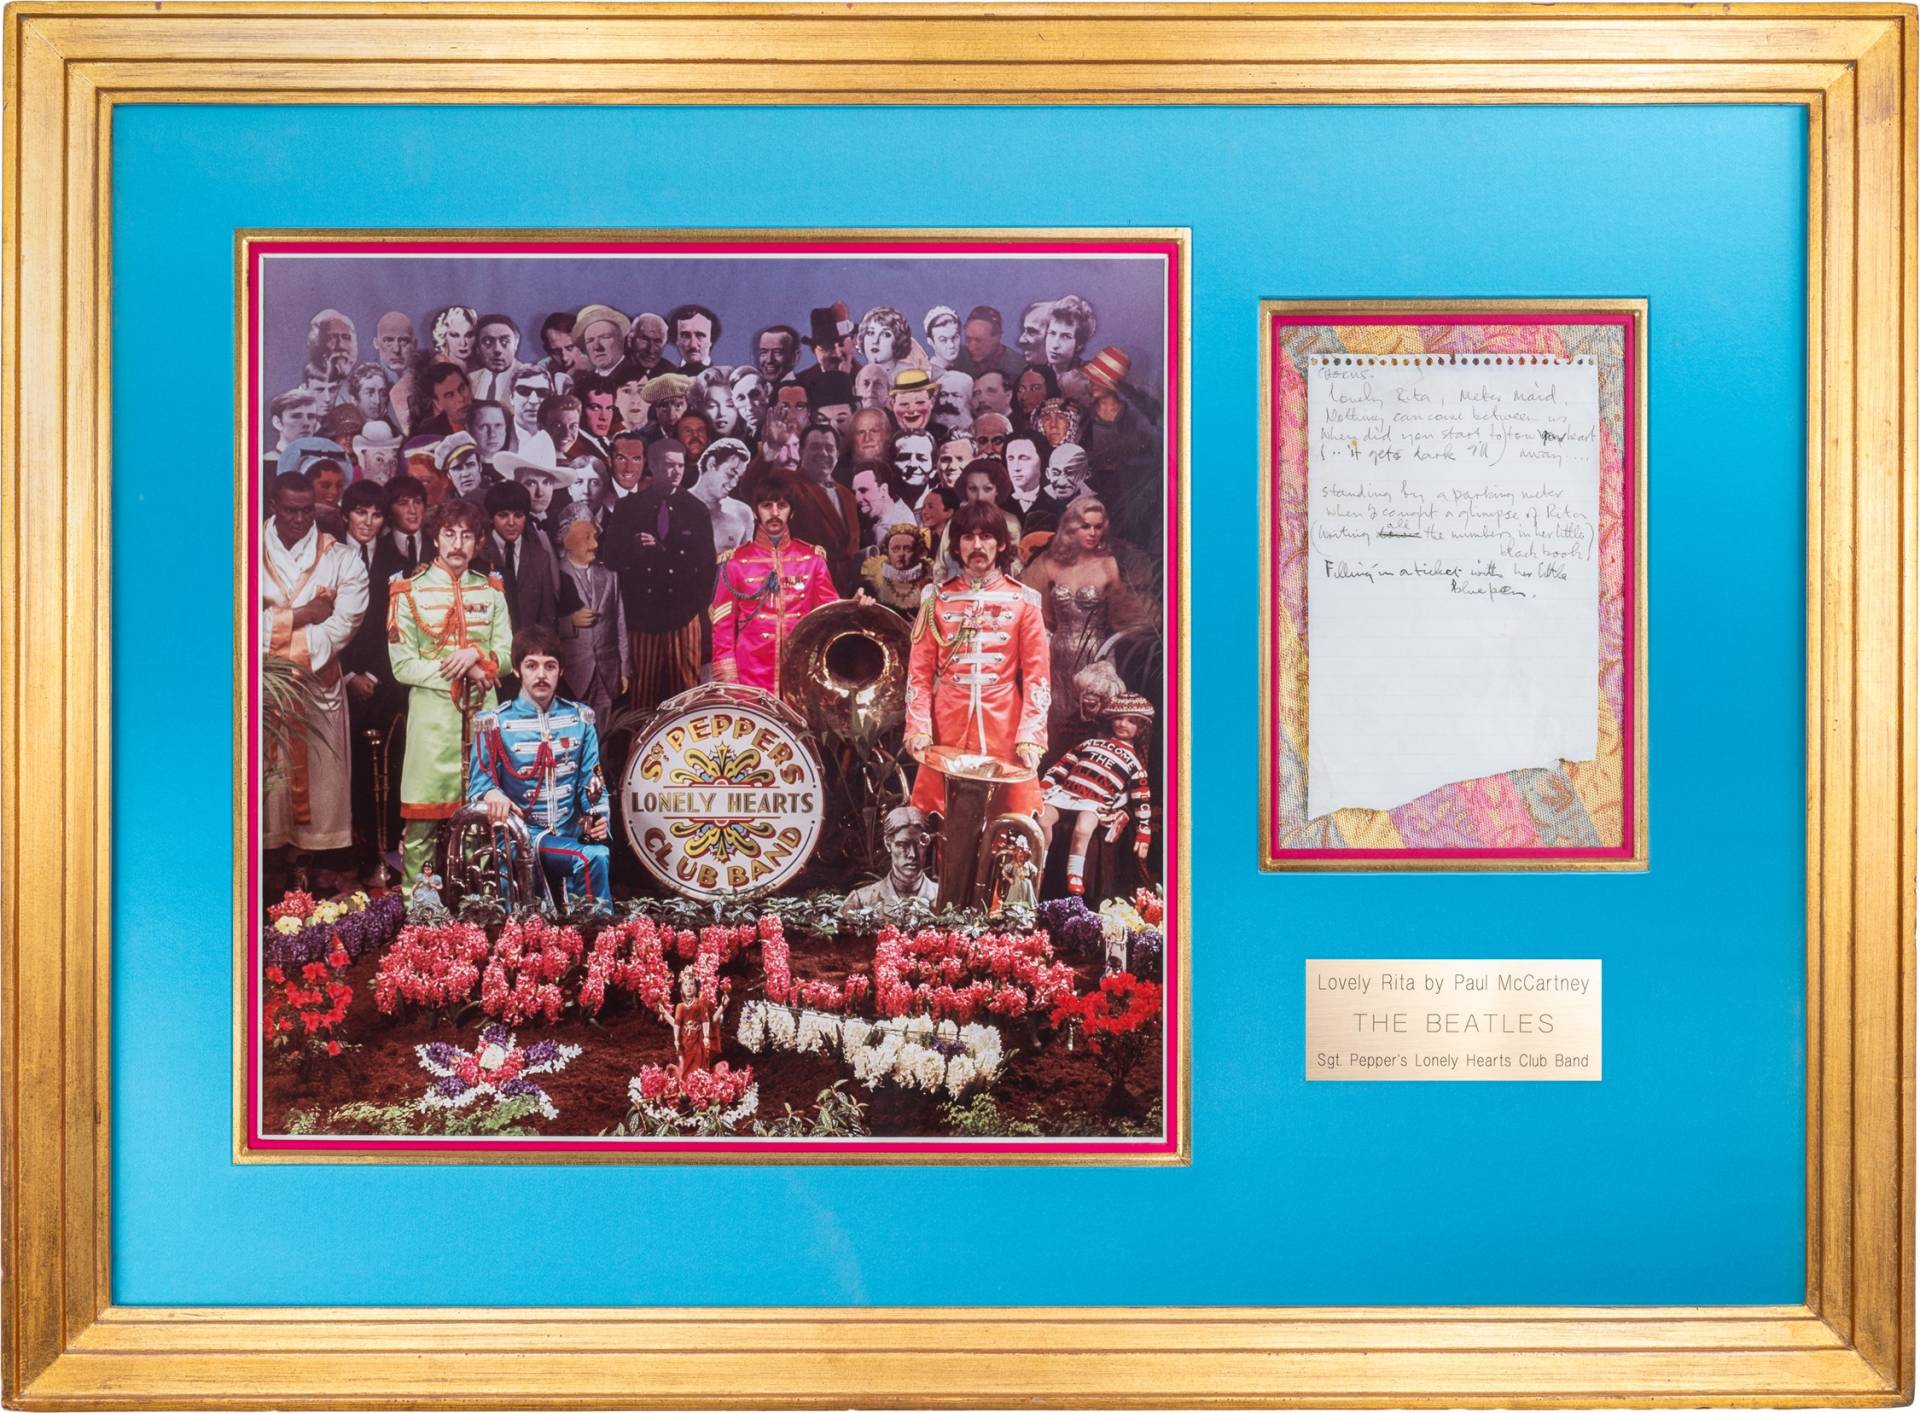 A frame containing a Beatles album cover and a piece of paper with handwriting on it.